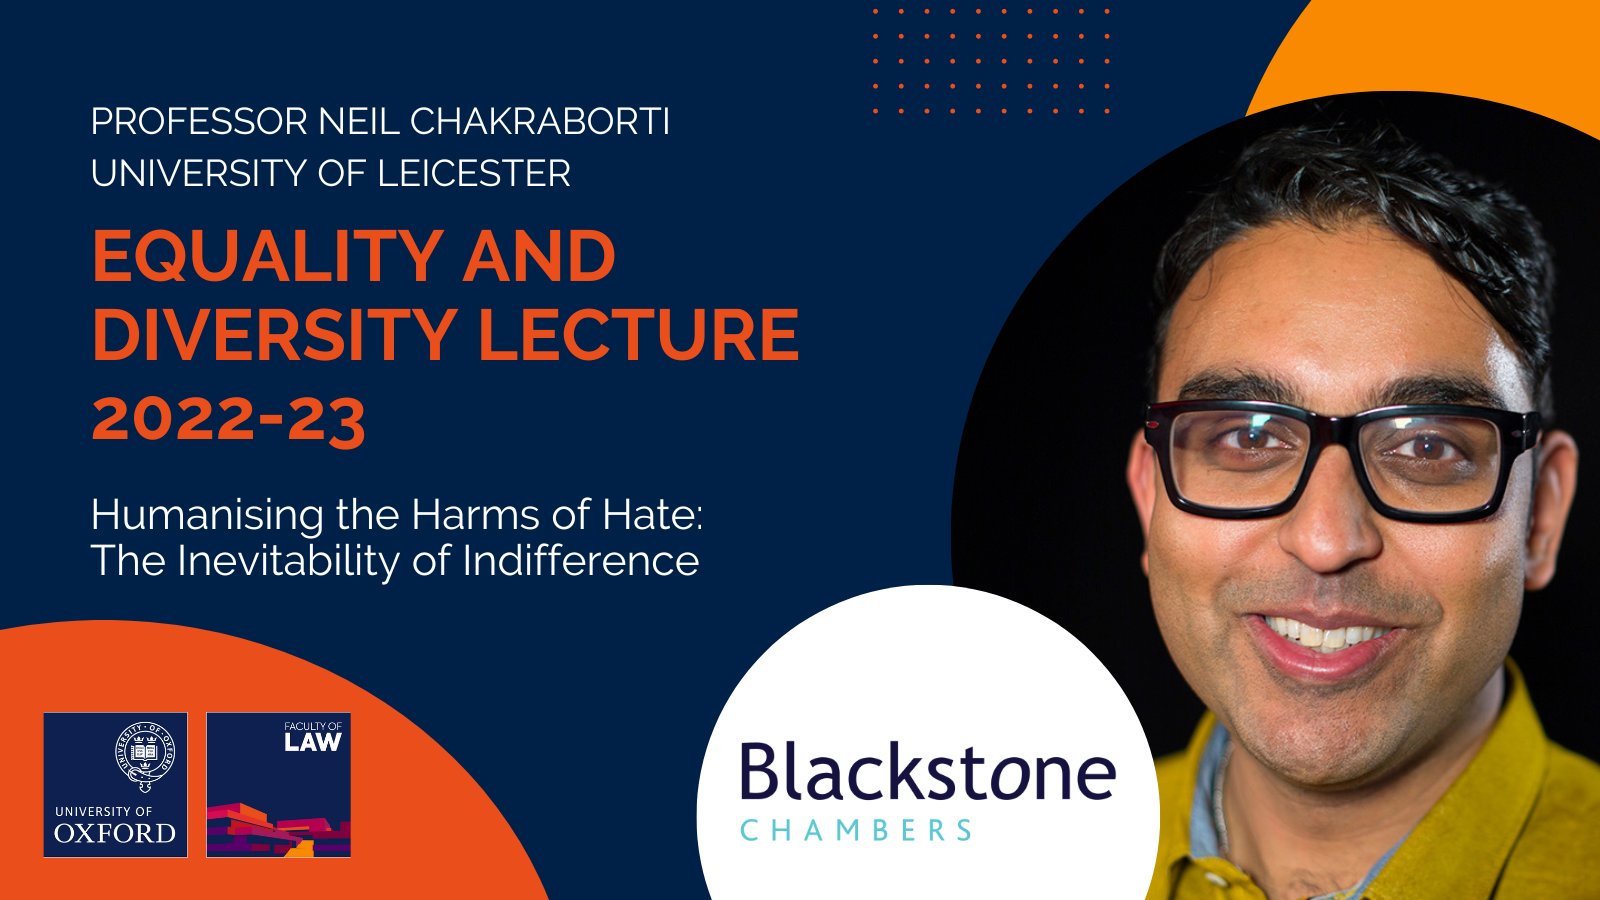 Equality and Diversity Lecture 2022-23: Humanising the Harms of Hate: The Inevitability of Indifference with Professor Neil Chakraborti, University of Leicester. Sponsored by Blackstone Chambers.